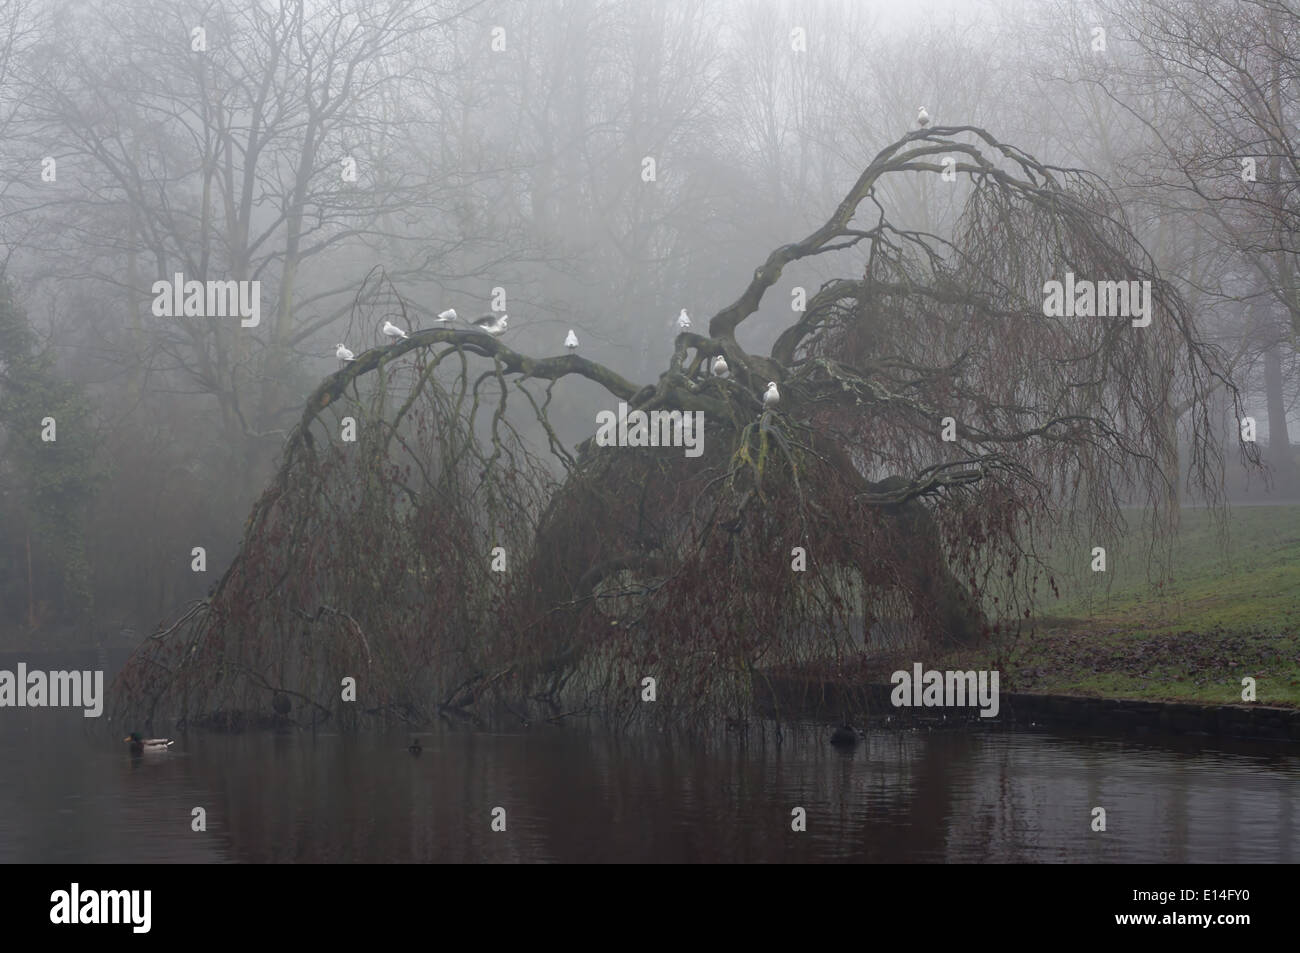 Seagulls perched on an old weeping willow tree on a foggy winters day Stock Photo